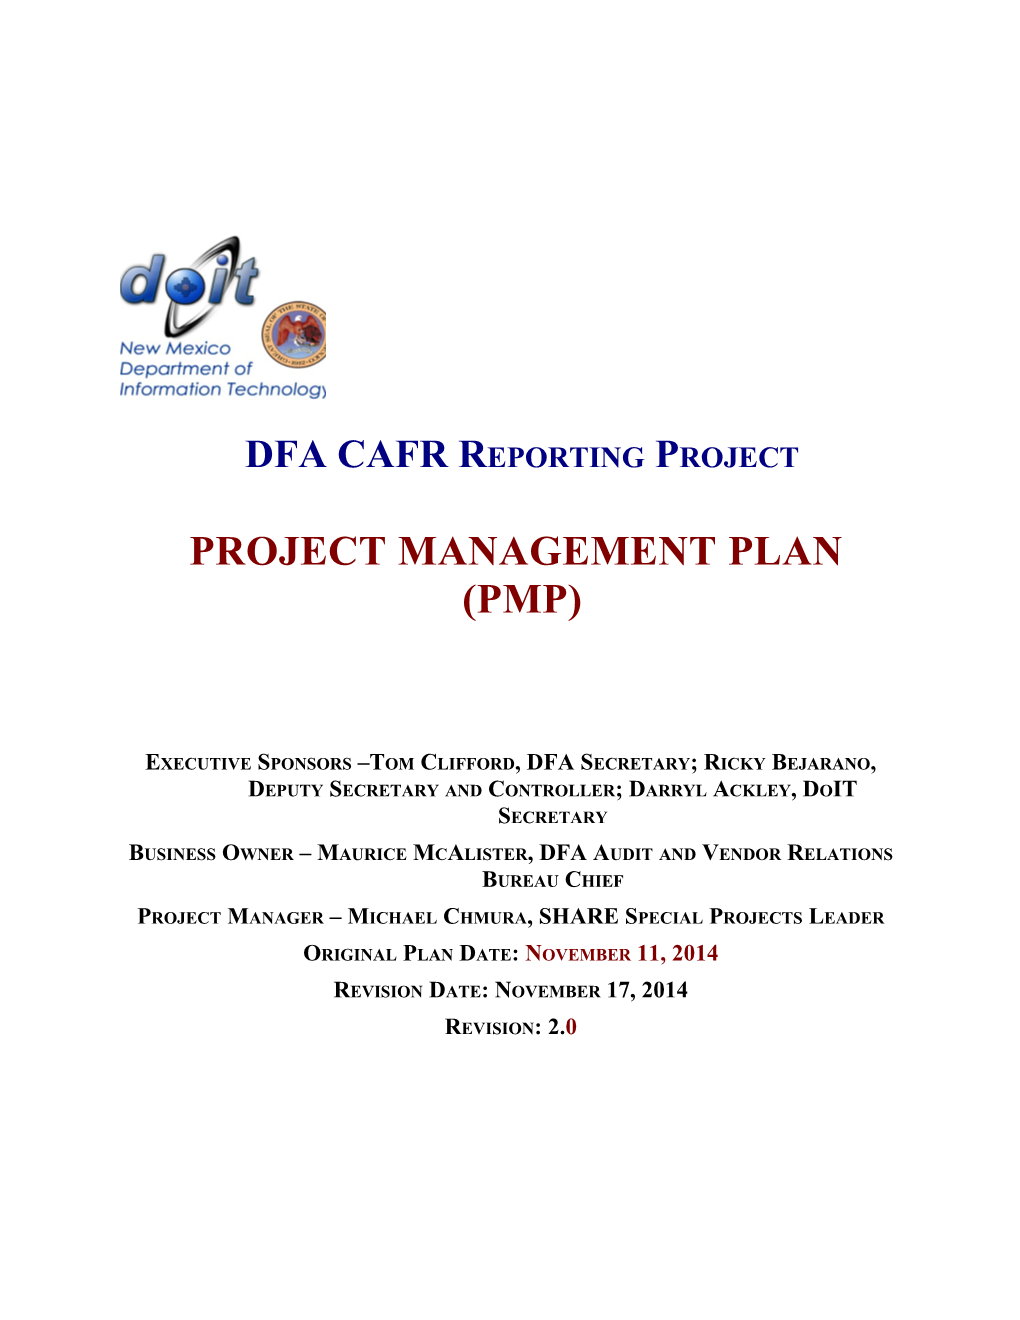 DFA CAFR Reporting Project